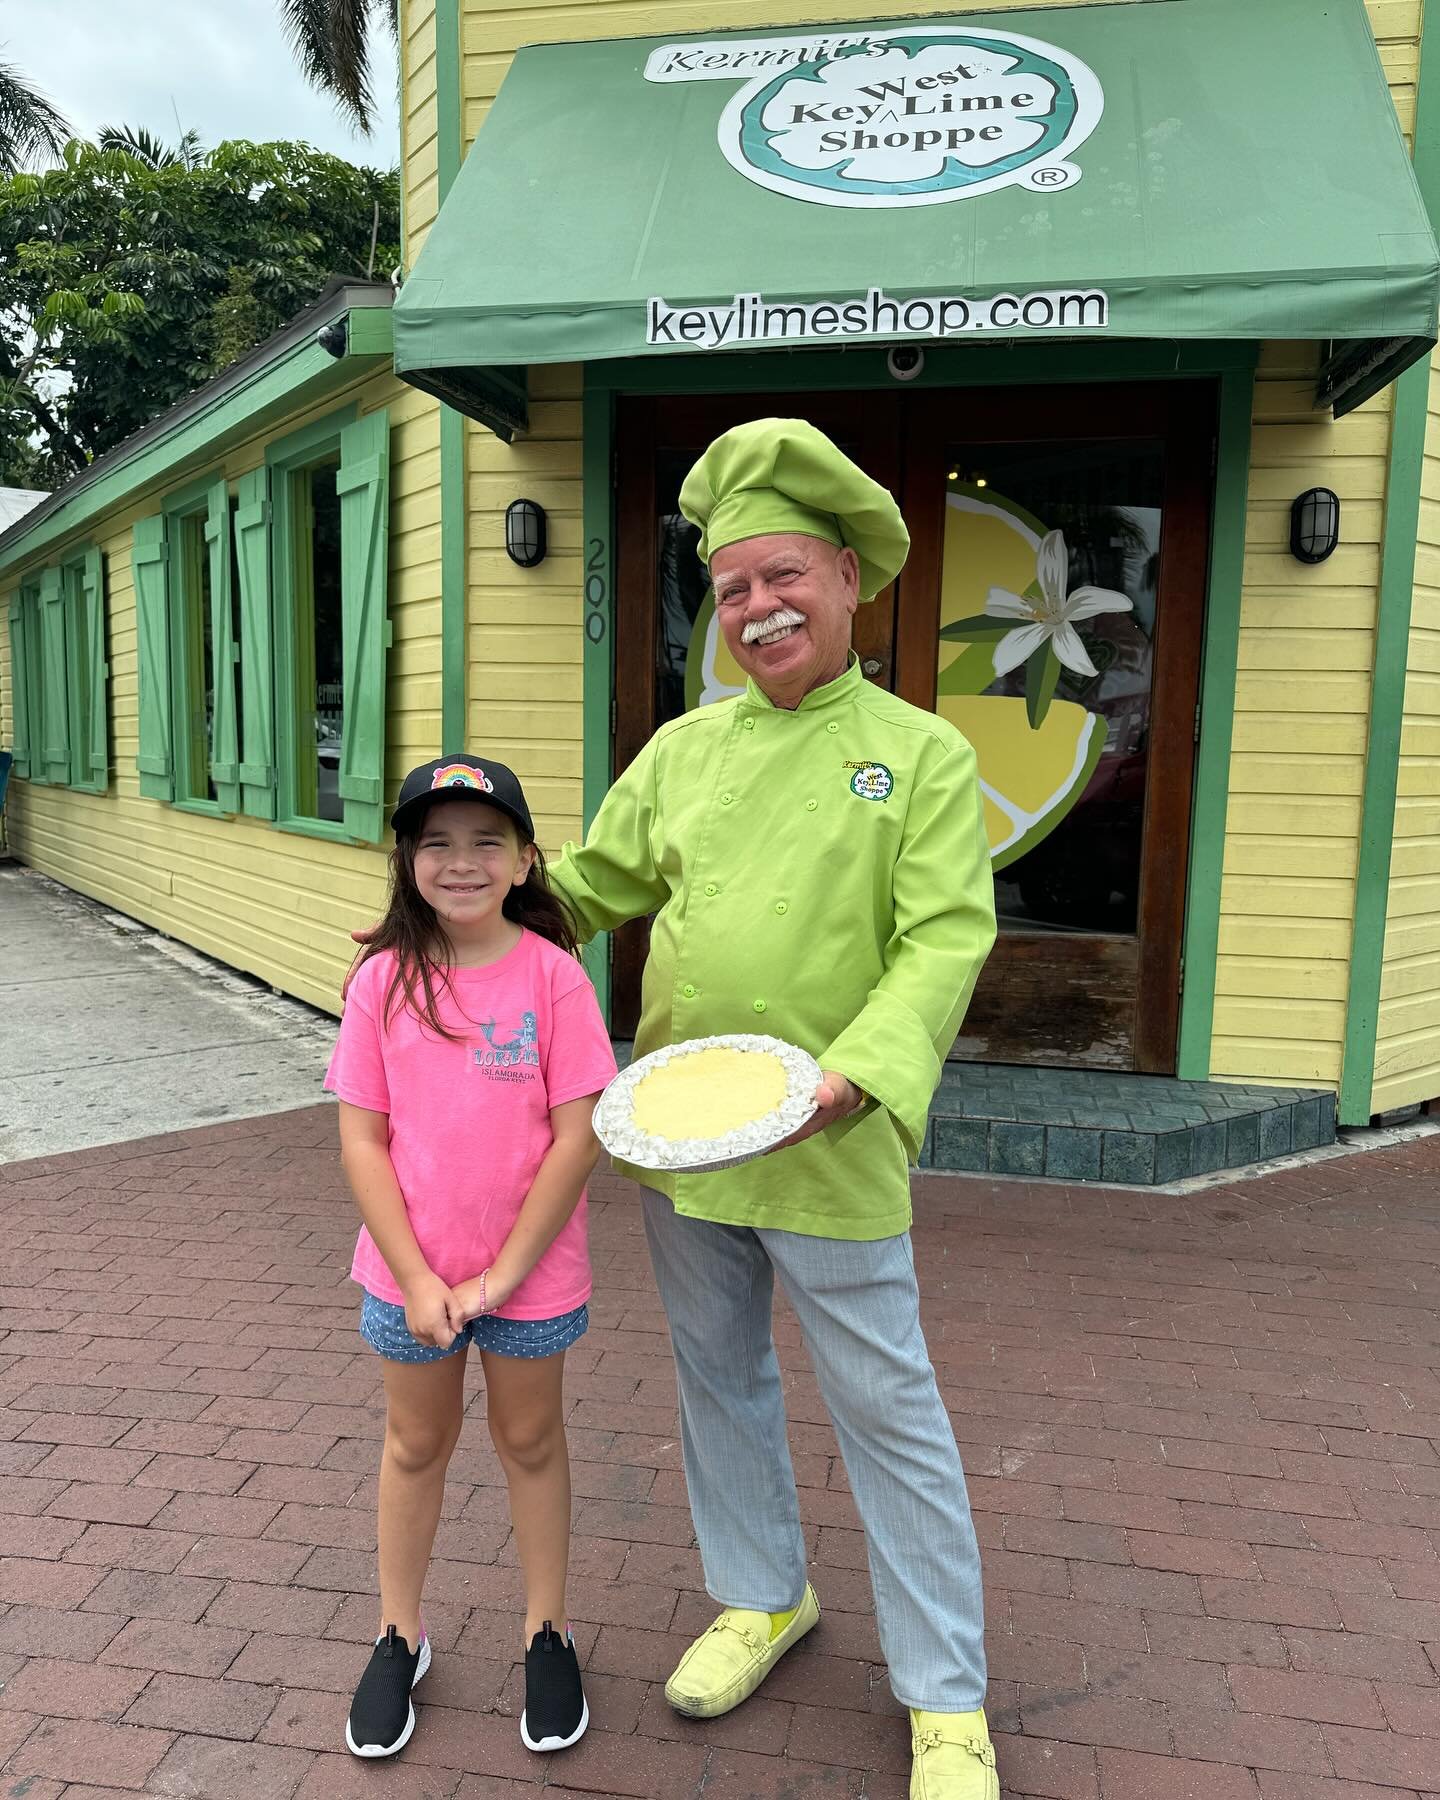 Savannah&rsquo;s Key West adventure just got a slice sweeter! 🥧 Finally met the legend behind the irresistible Kermit&rsquo;s Key Lime pie! @kermitskeylime #KeyWestEats #KermitsKeyLime #SweetTreats #FoodieAdventures #PiePerfection #MeetTheMaker #Mus